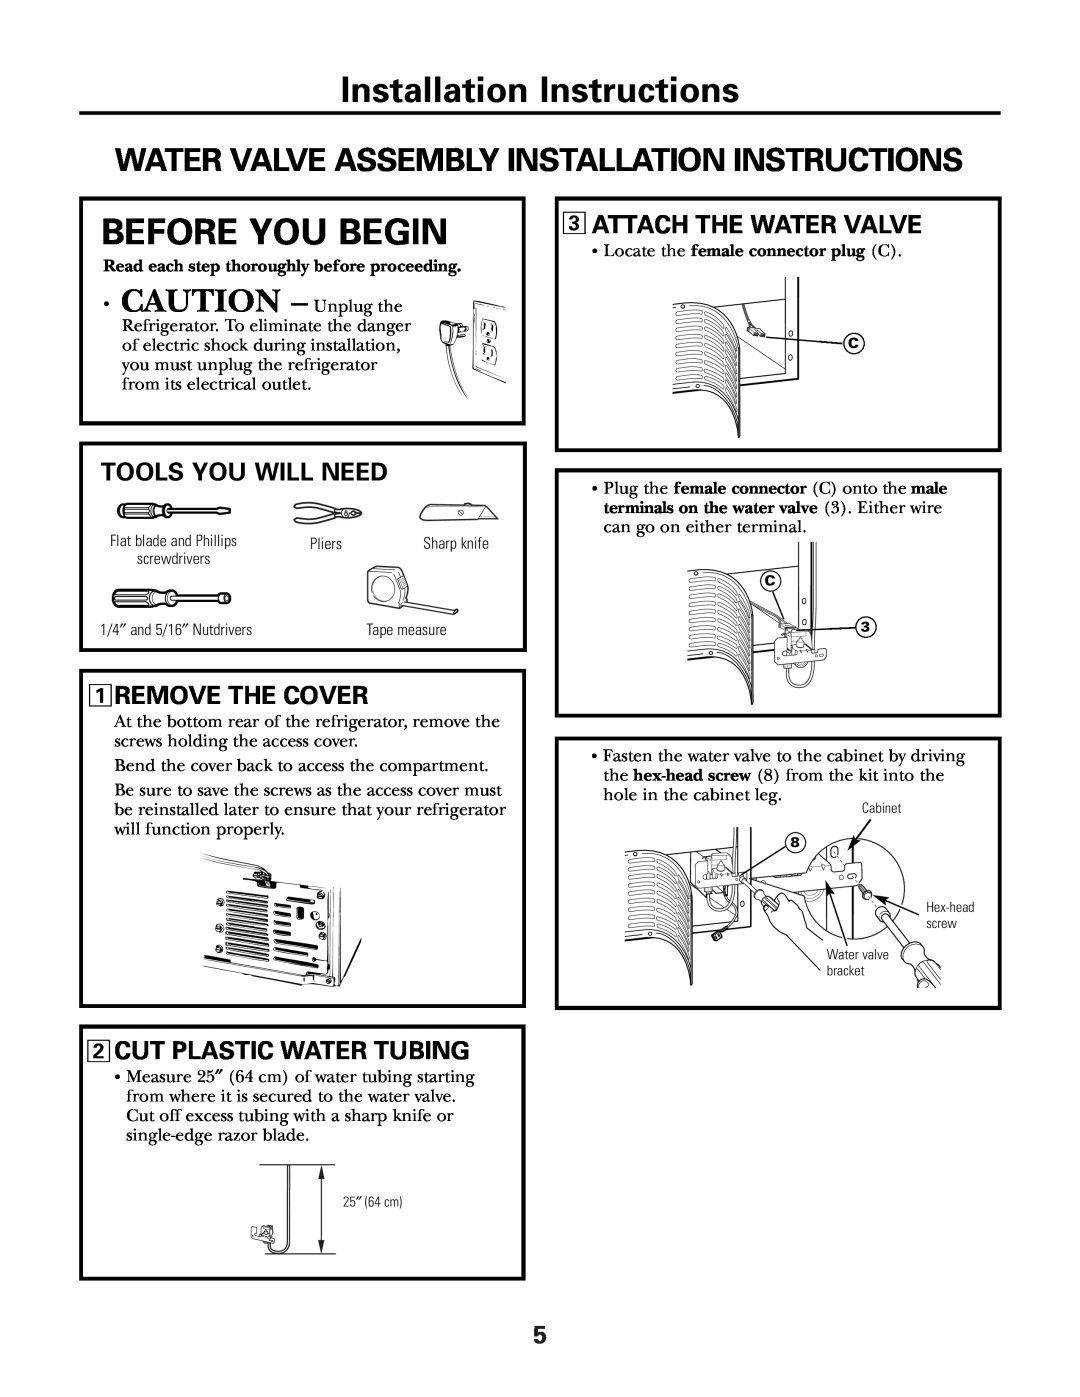 GE GBS22KB Installation Instructions, Before You Begin, CAUTION - Unplug the, Attach The Water Valve, Tools You Will Need 